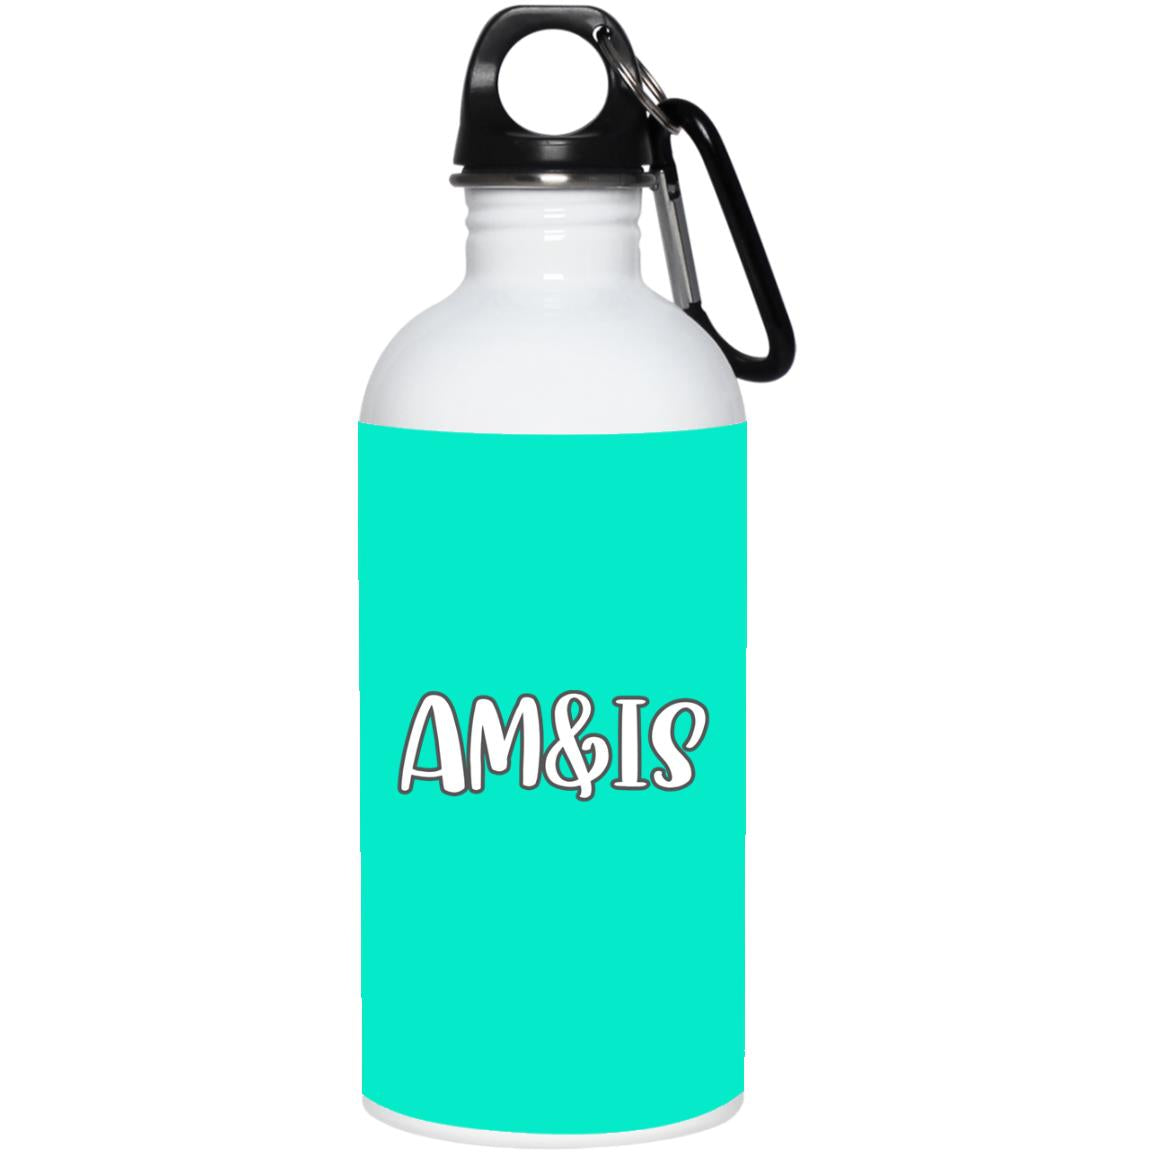 TEAL ONE SIZE - AM&IS Activewear 20 oz. Stainless Steel Water Bottle - Drinkware at TFC&H Co.